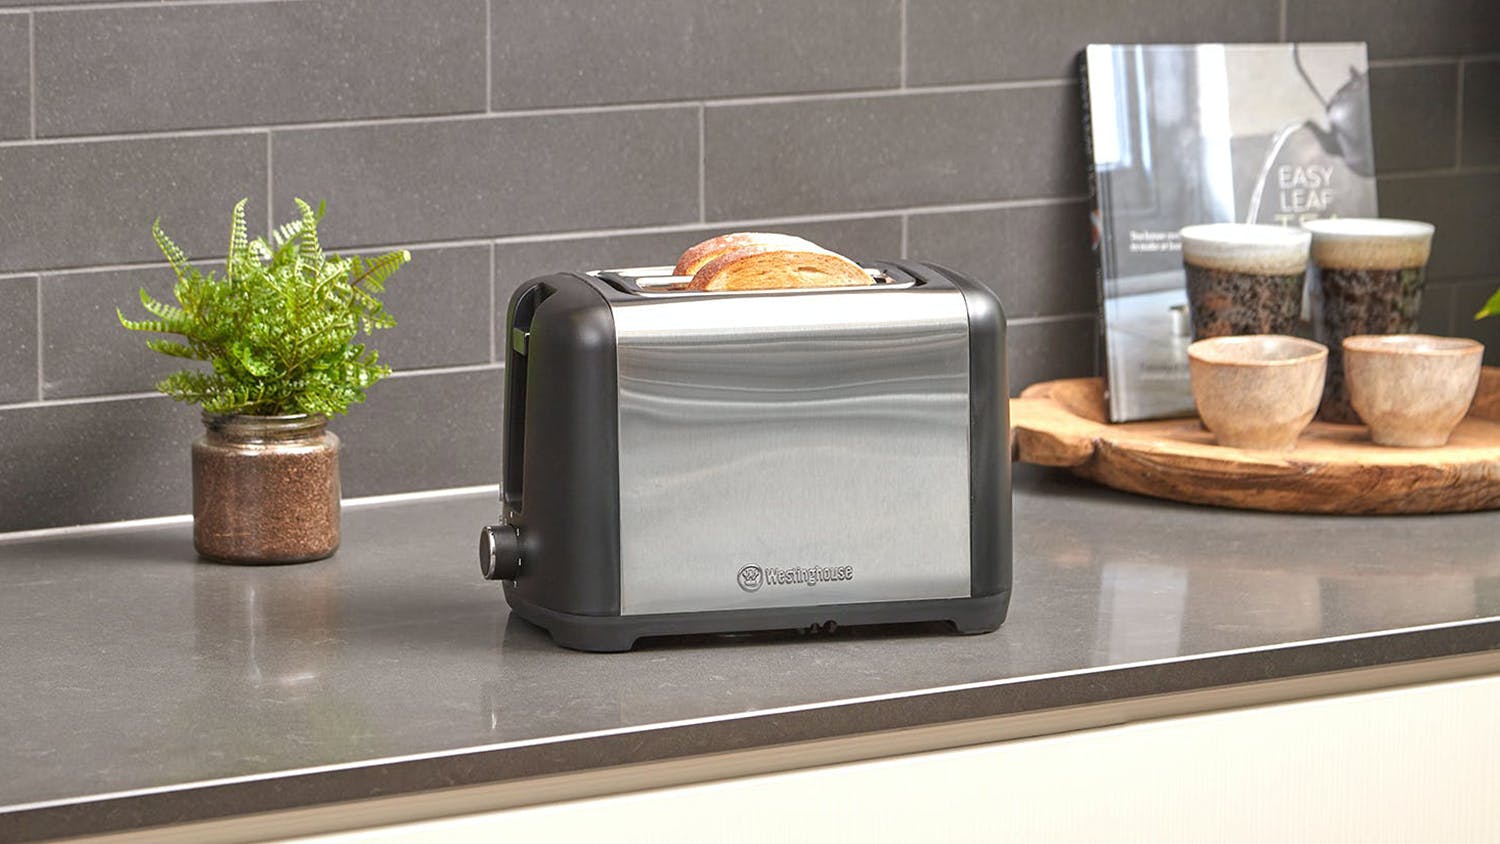 Westinghouse 2 Slice Toaster - Stainless Steel